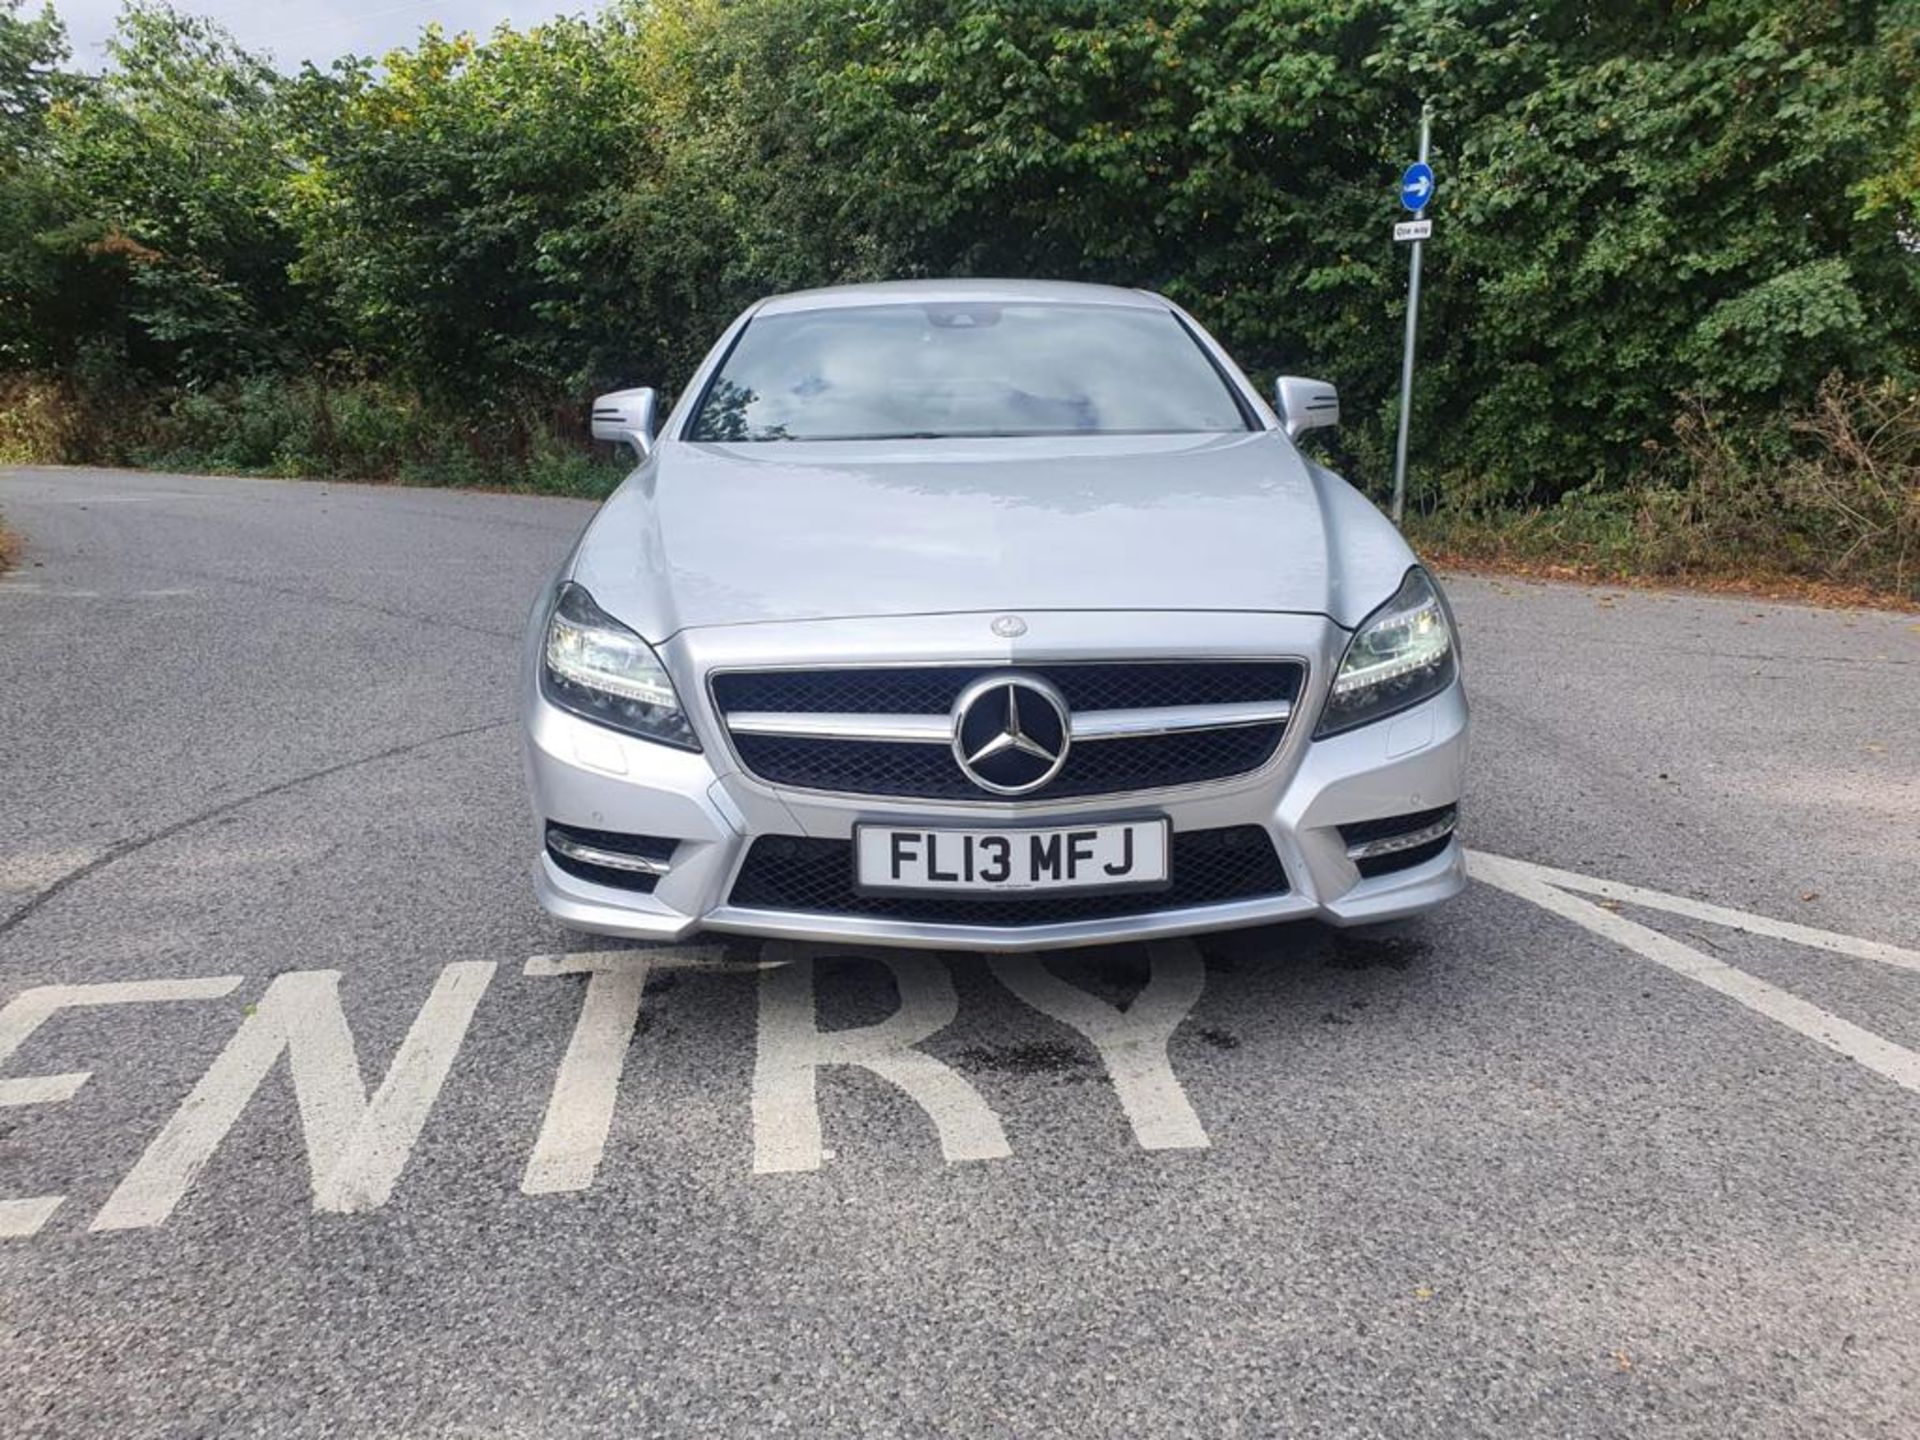 2013 MERCEDES-BENZ CLS250 CDI AMG BLUE-CY SPORT SILVER COUPE, 2.2 DIESEL, 45,952 MILES *NO VAT* - Image 2 of 34